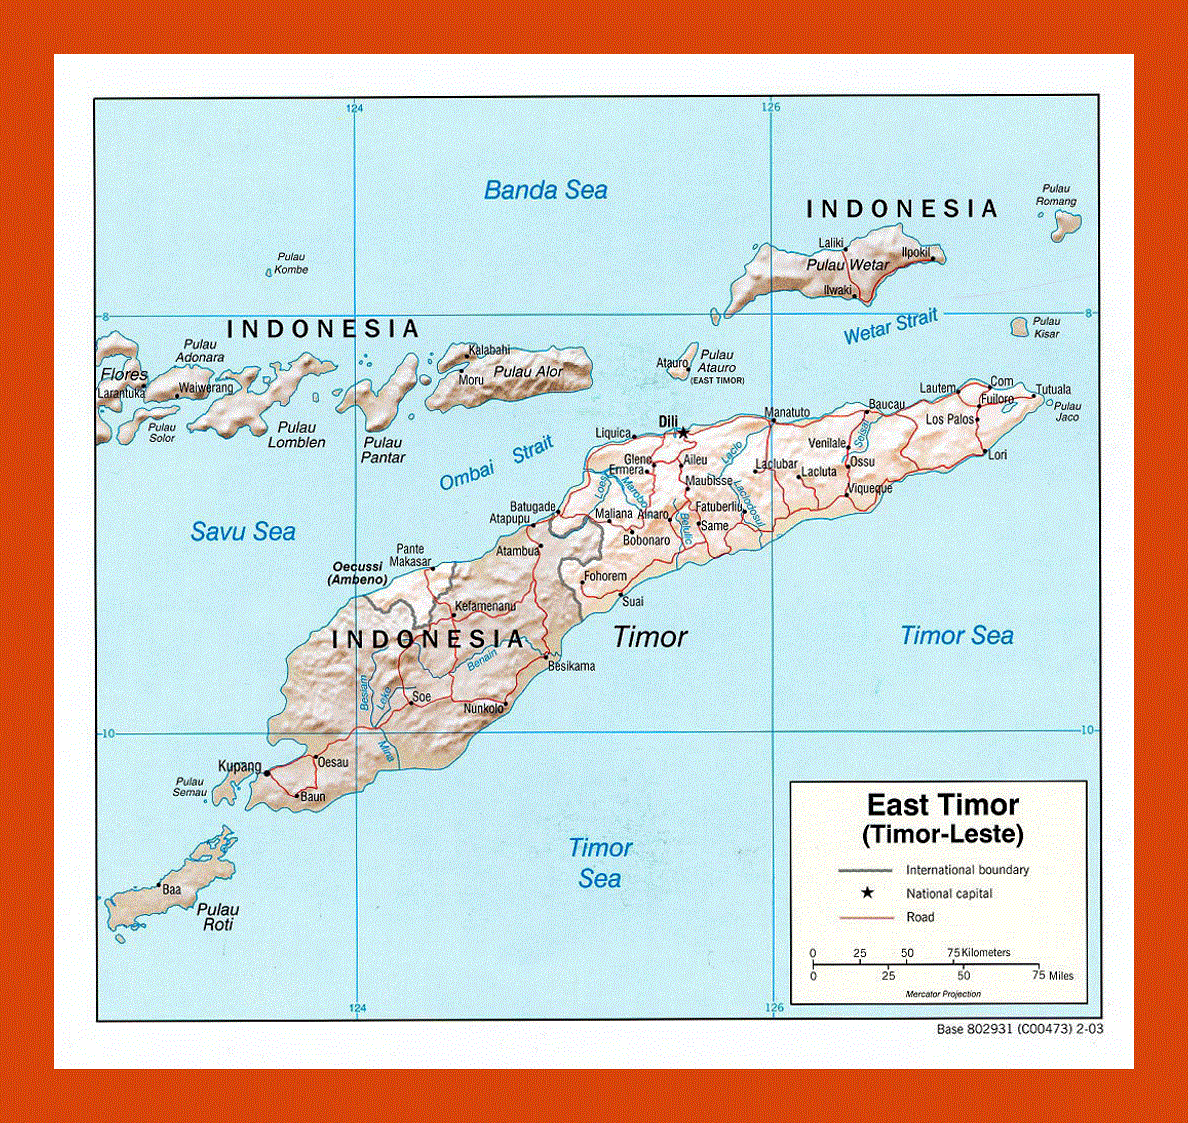 Political map of East Timor - 2003